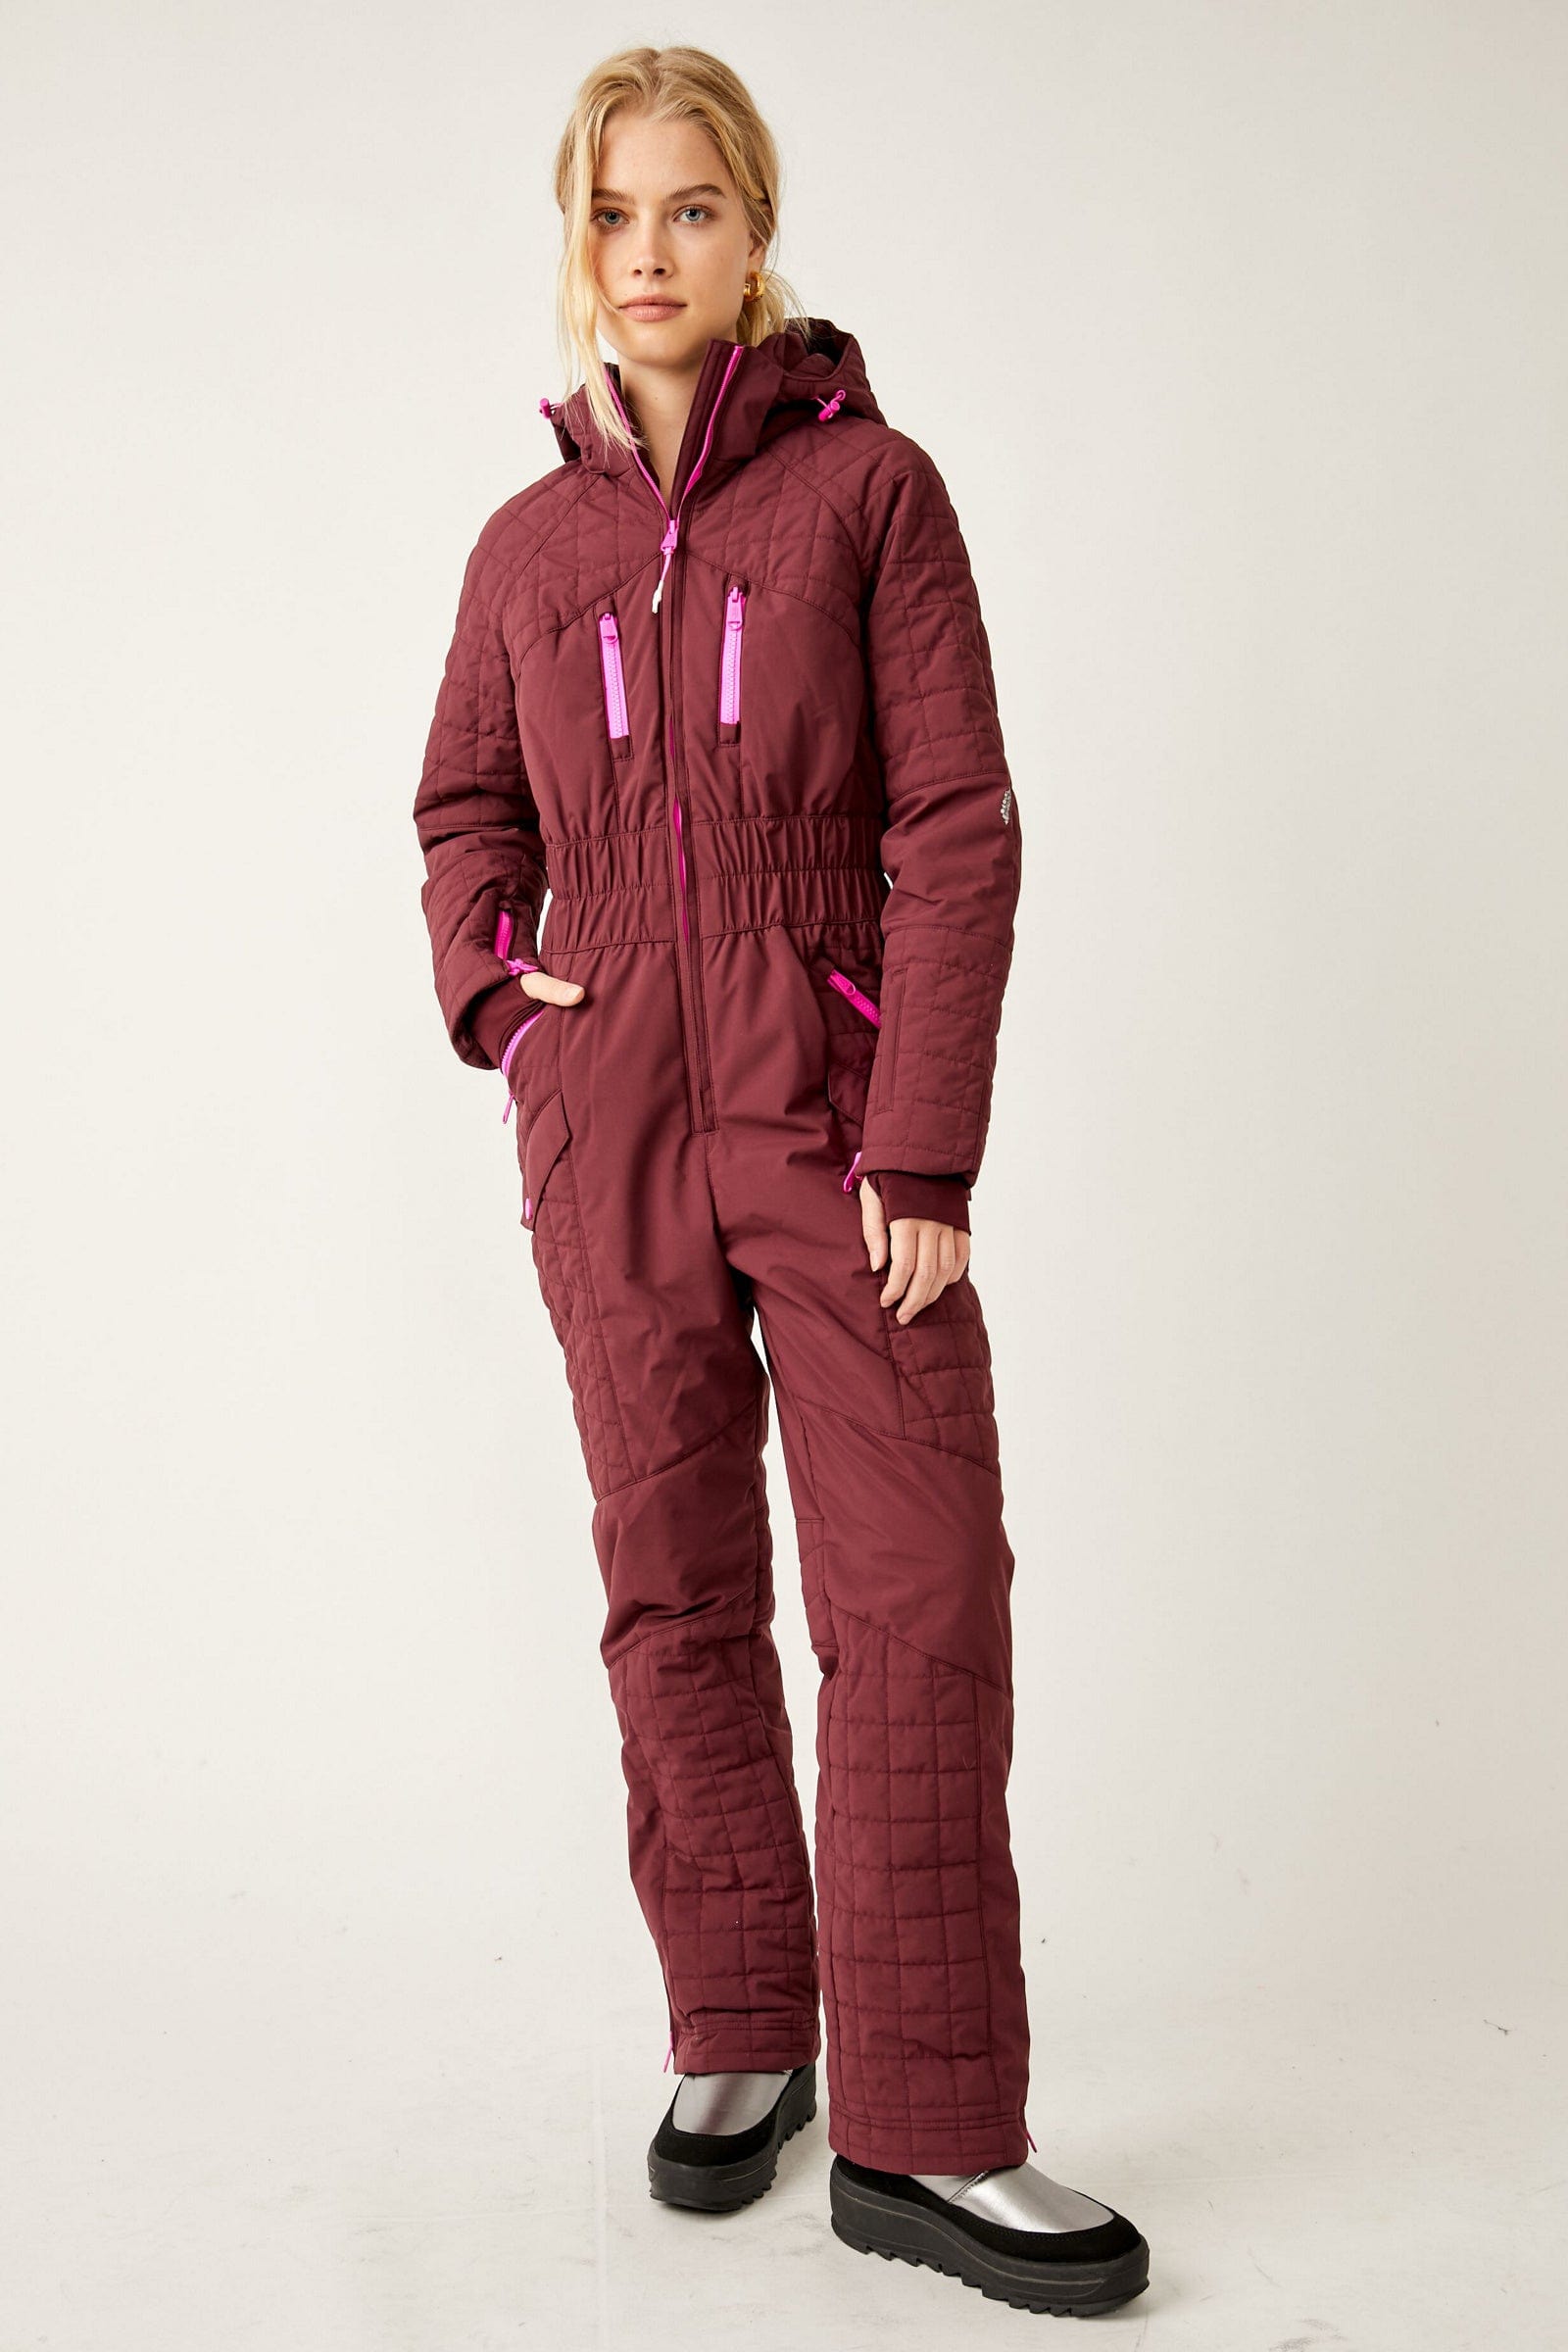 This Free People Ski Suit Is Travel Writer-approved